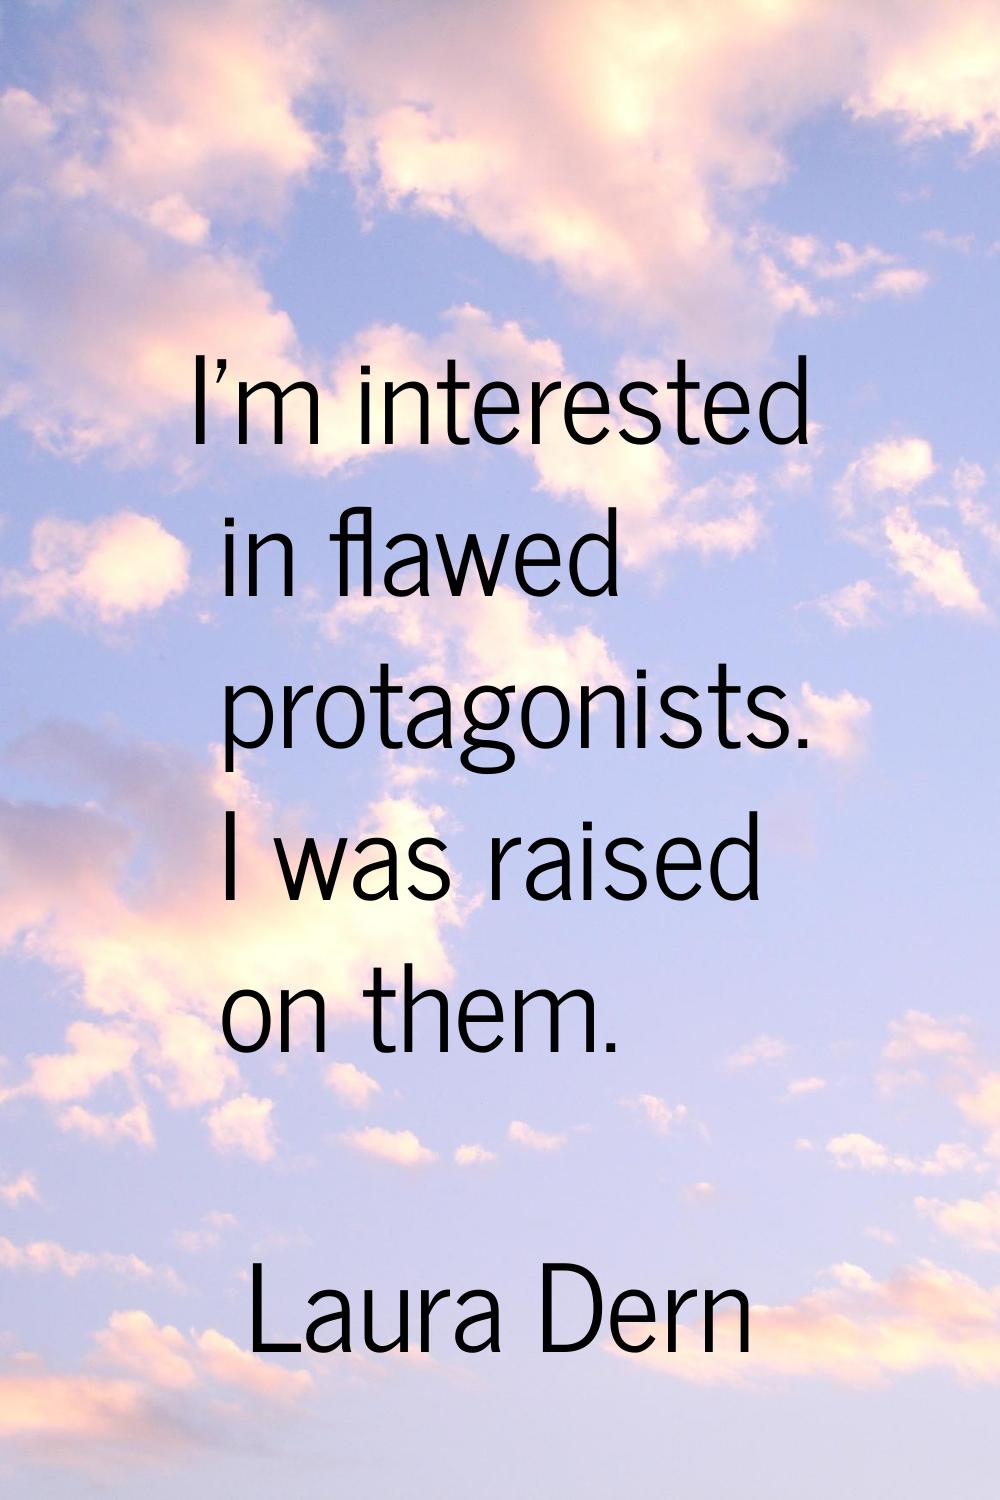 I'm interested in flawed protagonists. I was raised on them.